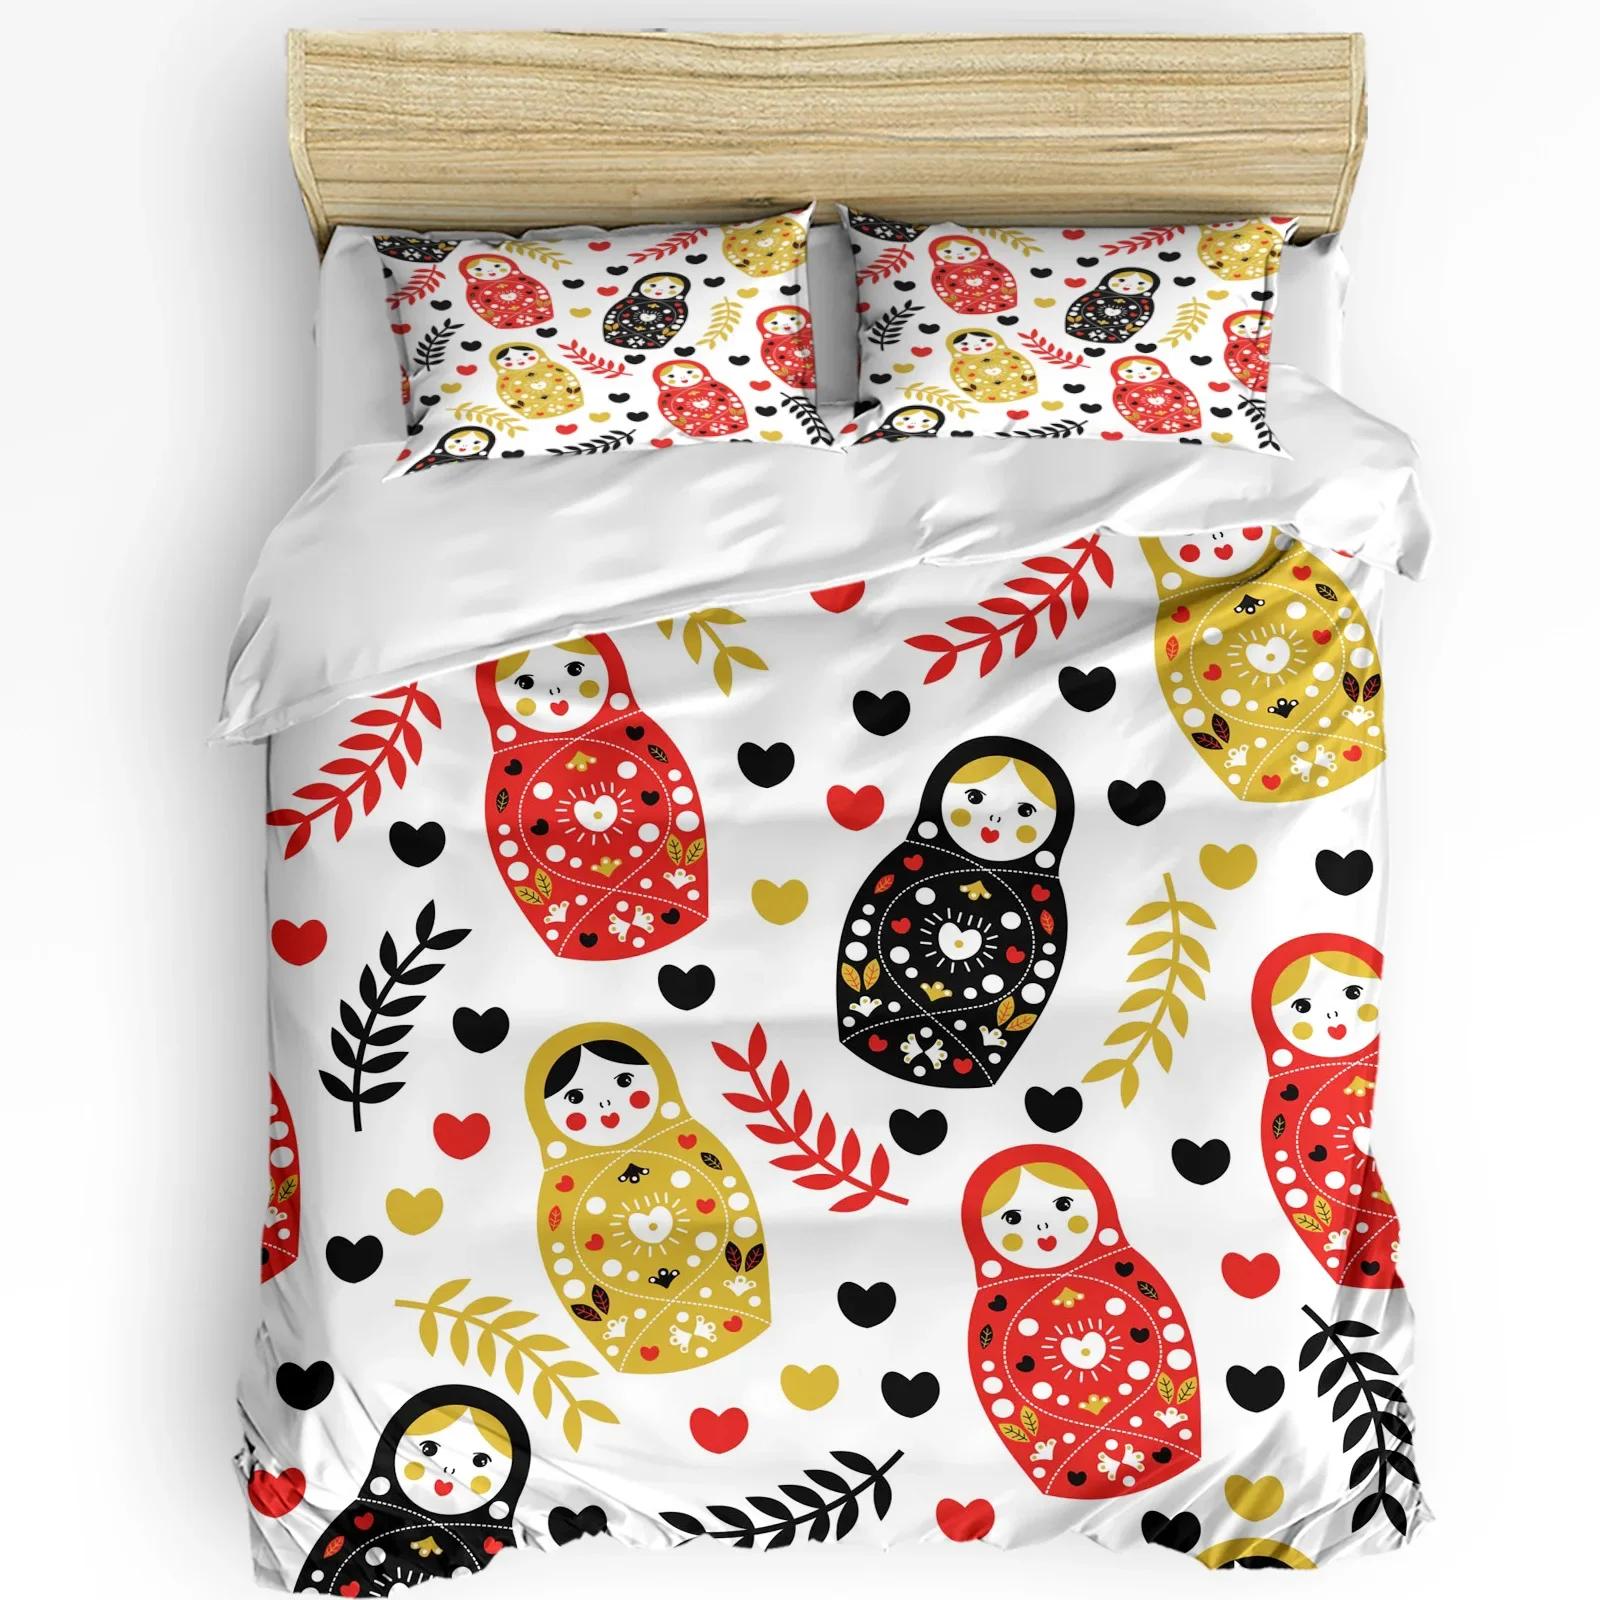 Russian Doll Heart Leaves Printed Comfort Duvet Cover Pillow Case Home Textile Quilt Cover Boy Kid Teen Girl 3pcs Be